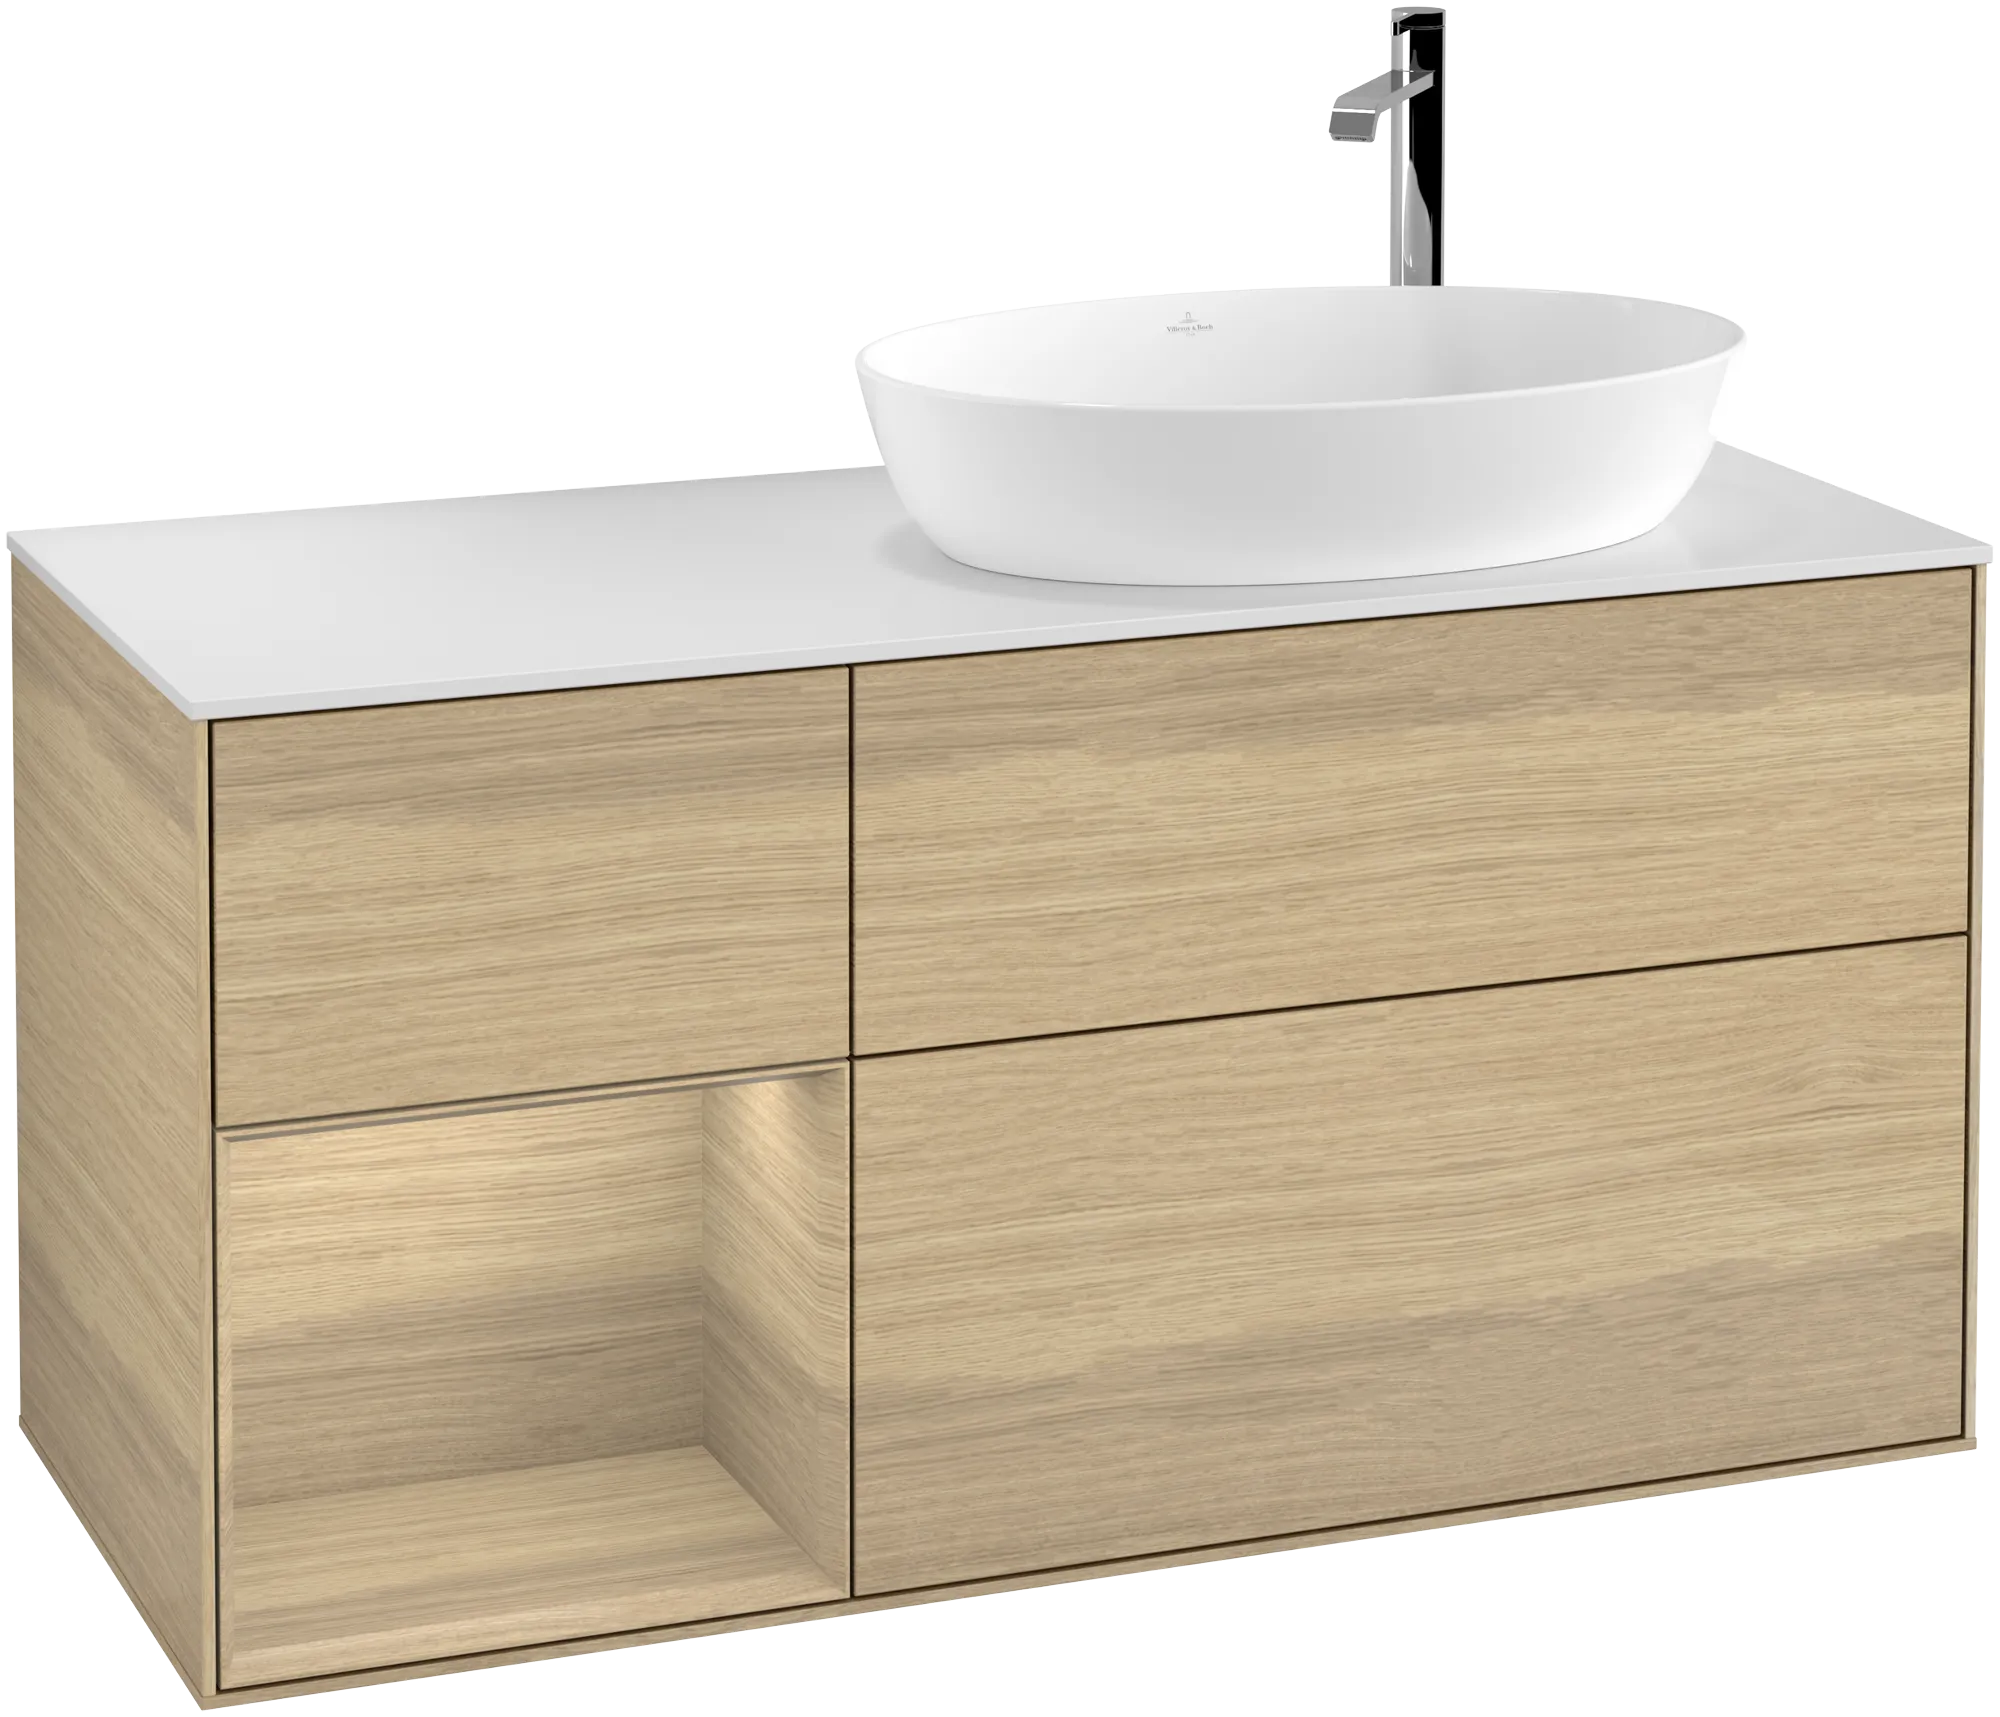 Picture of VILLEROY BOCH Finion Vanity unit, with lighting, 3 pull-out compartments, 1200 x 603 x 501 mm, Oak Veneer / Oak Veneer / Glass White Matt #G921PCPC